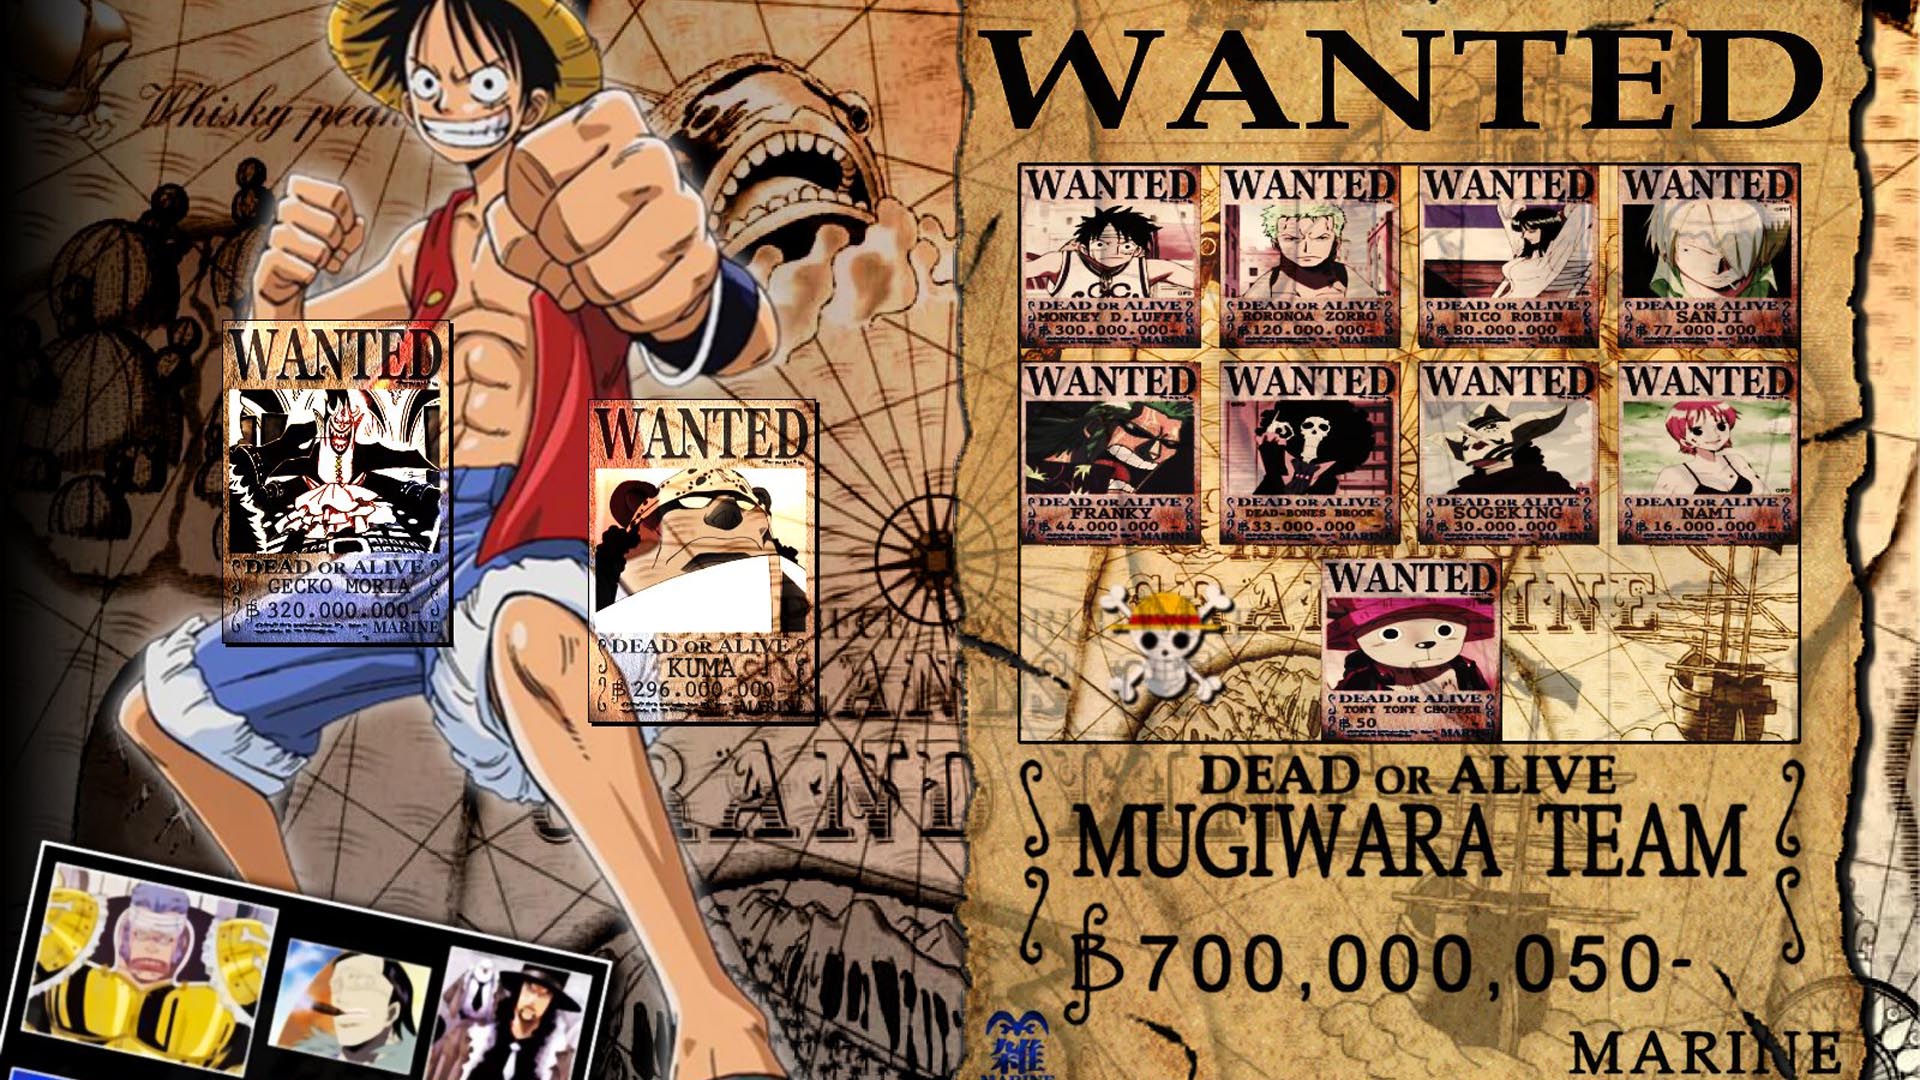 66 One Piece Wallpaper Wanted On Wallpapersafari Images, Photos, Reviews